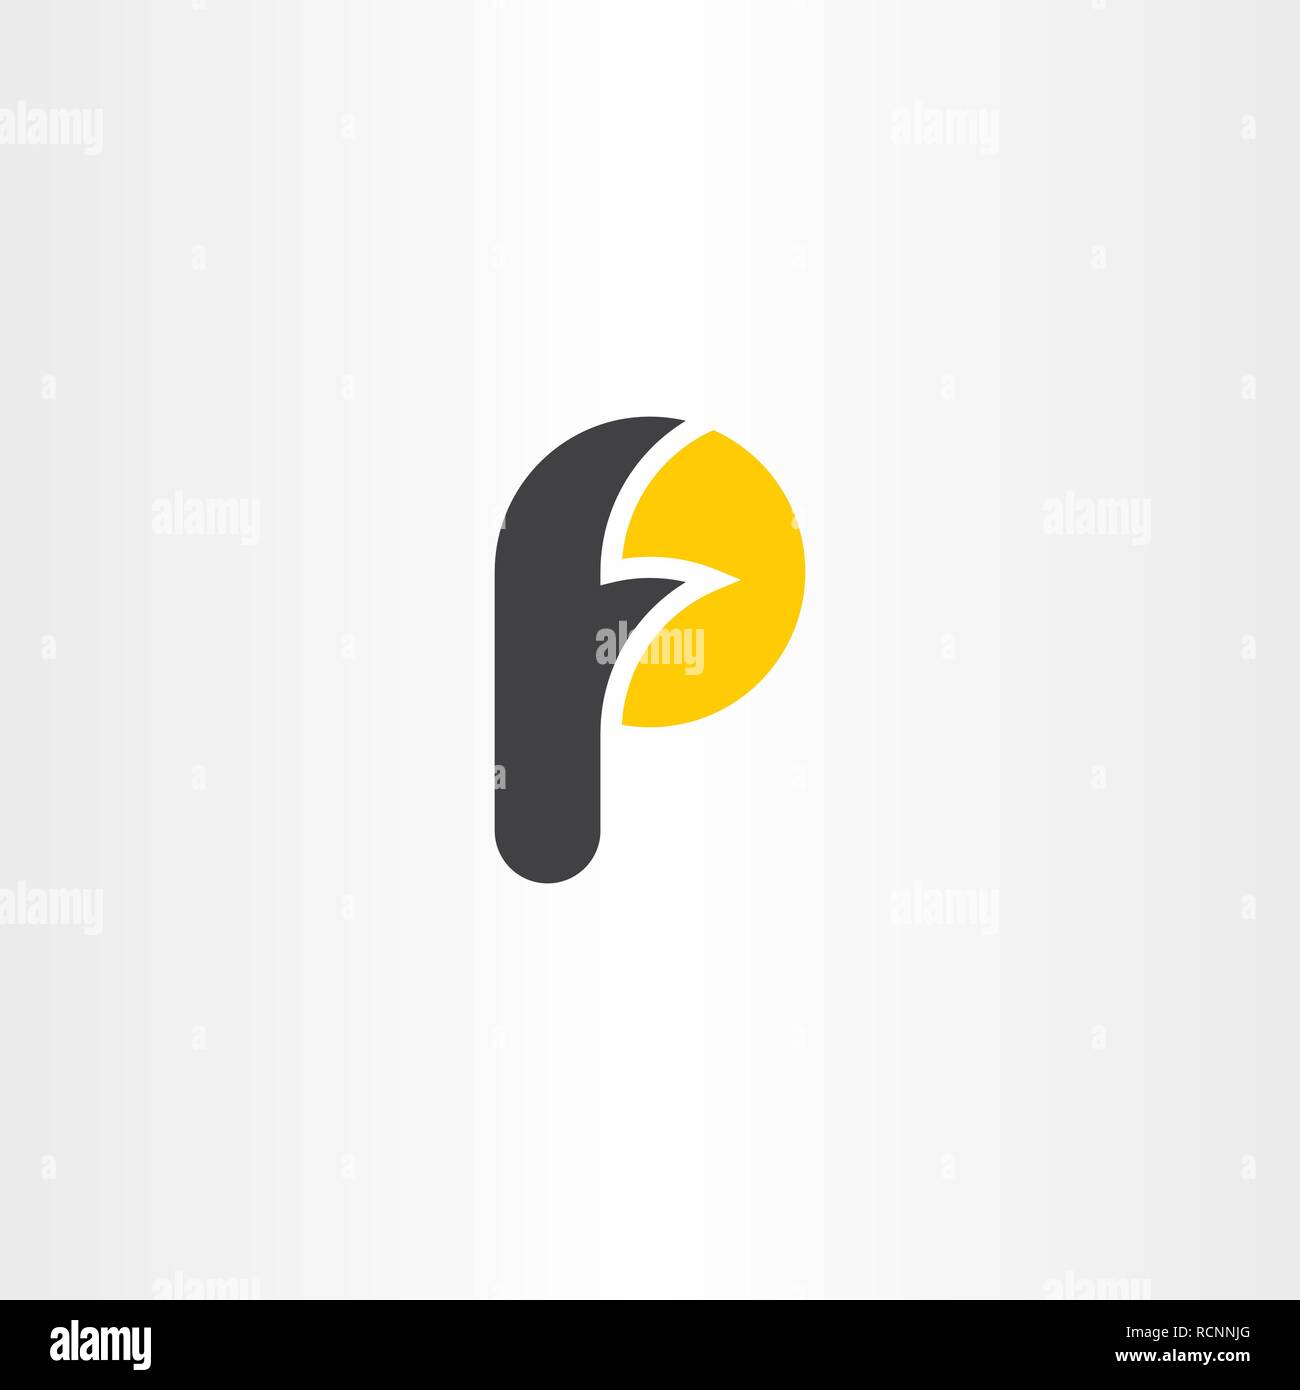 letter f and p fp logo vector icon design element Stock Vector